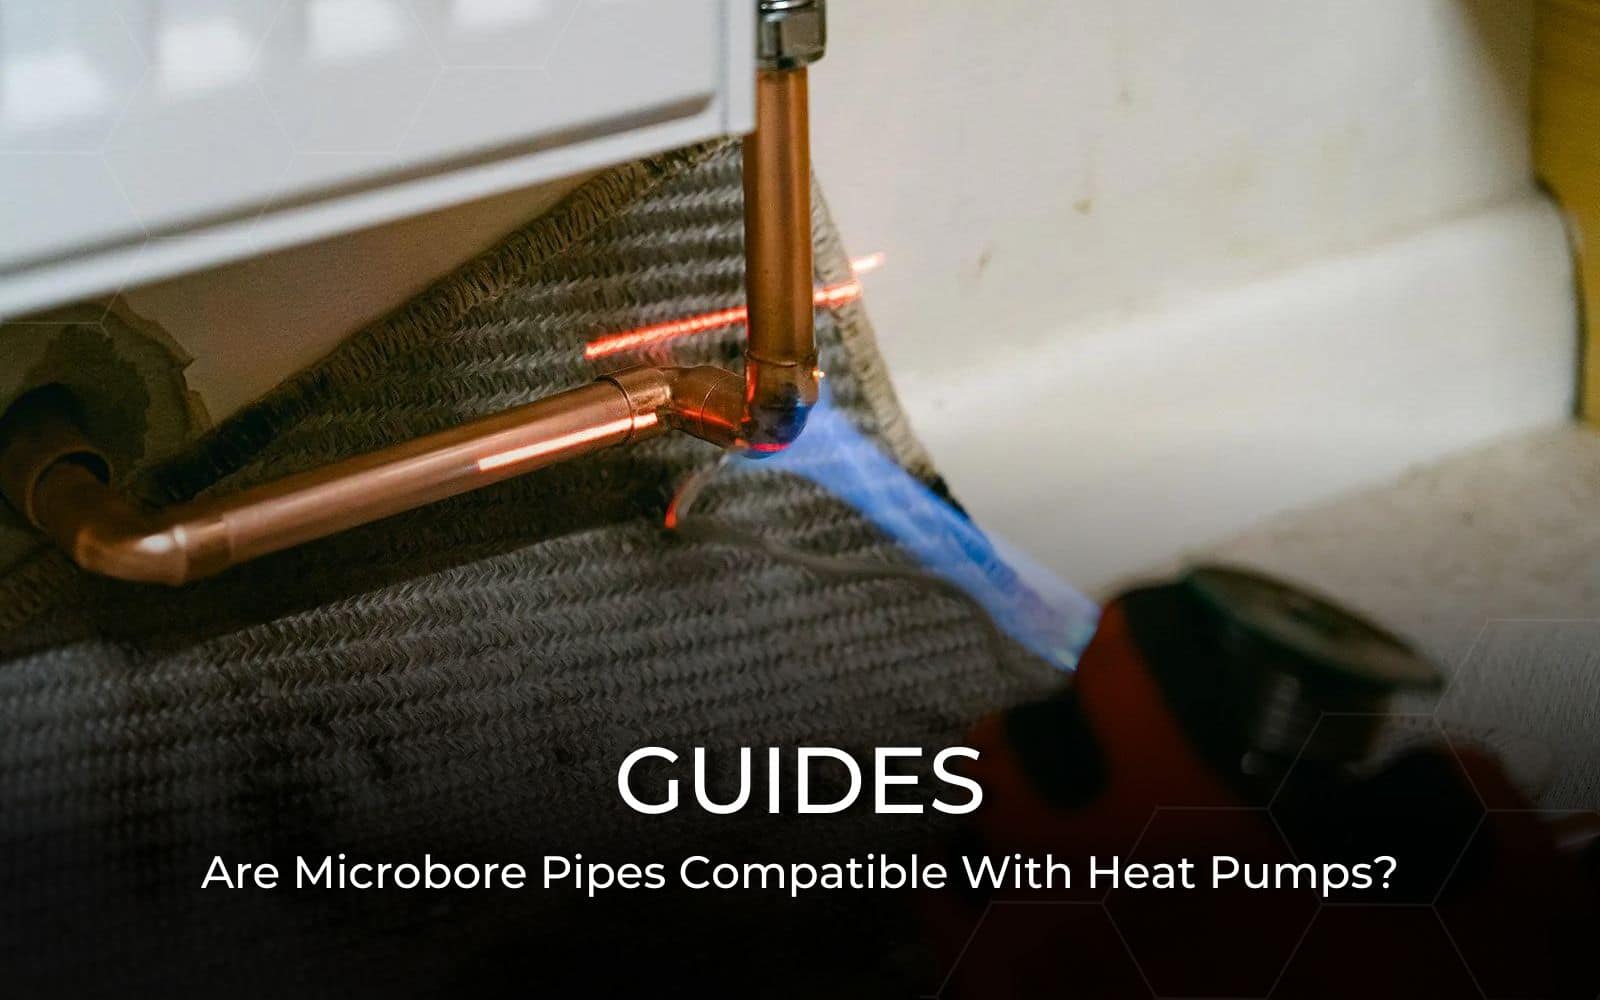 Are Microbore Pipes Compatible With Heat Pumps?